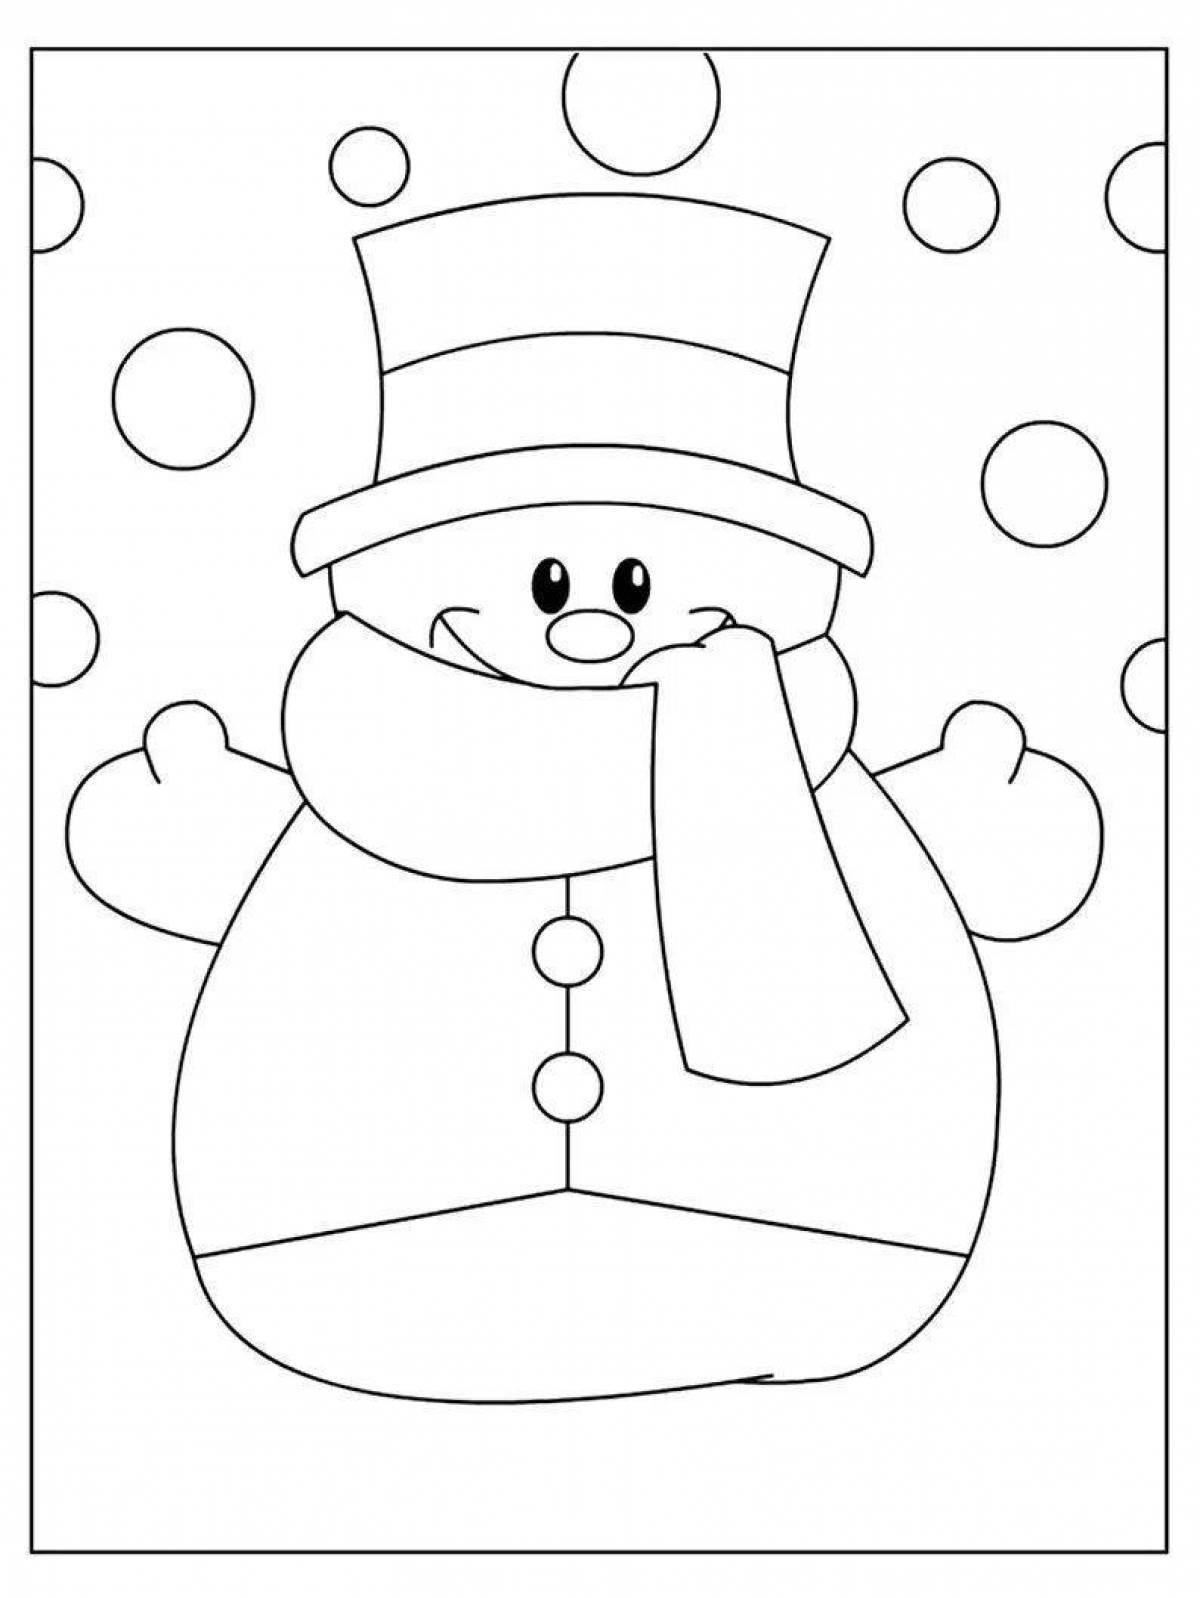 Coloring snowman mask with fluffy coloring